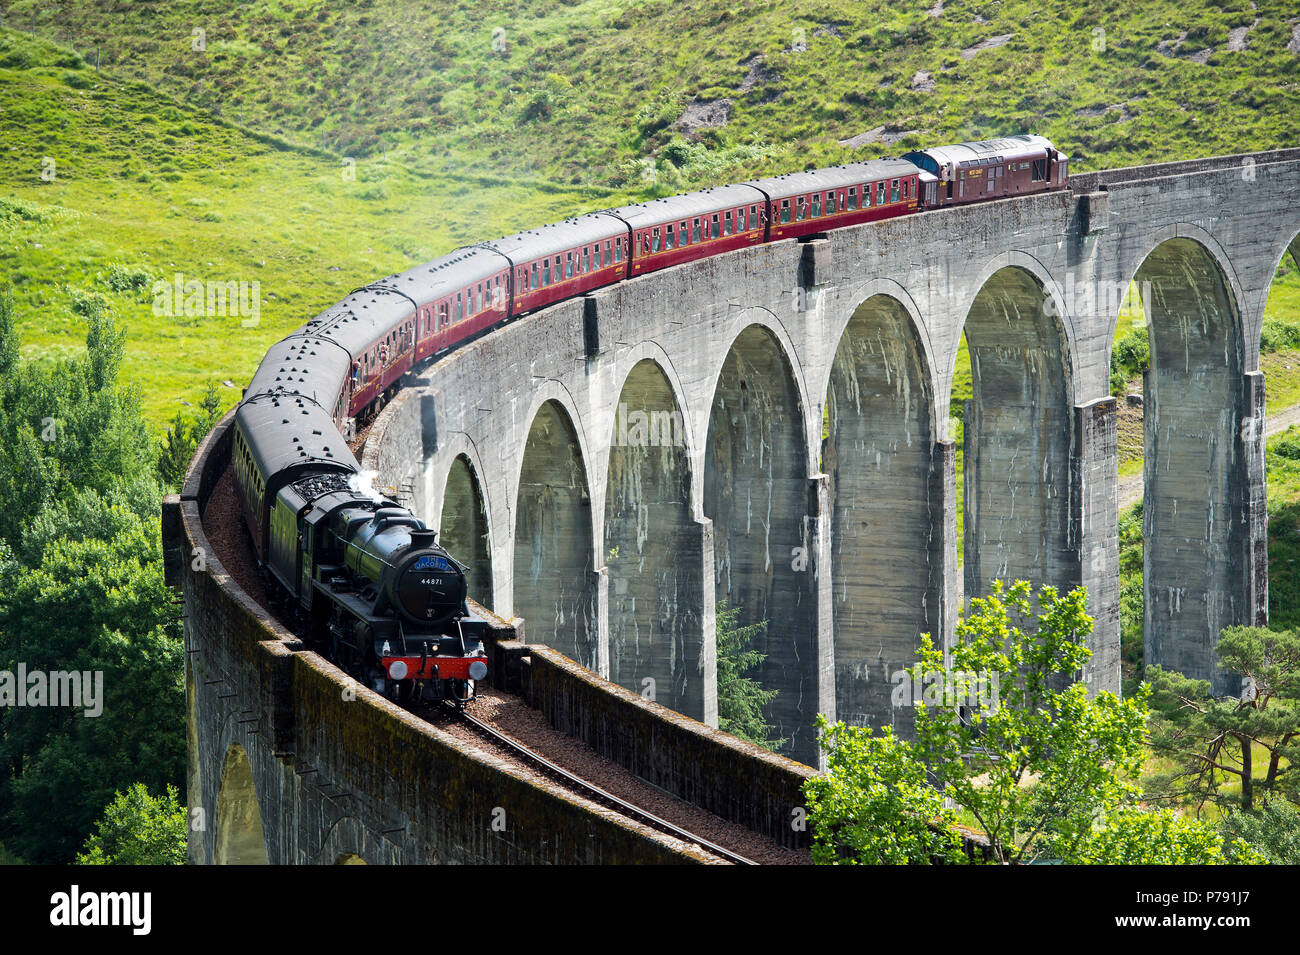 The Jacobite Express also known as the Hogwarts Express crosses the Glenfinnan Viaduct on route between Fort William and Mallaig. Stock Photo